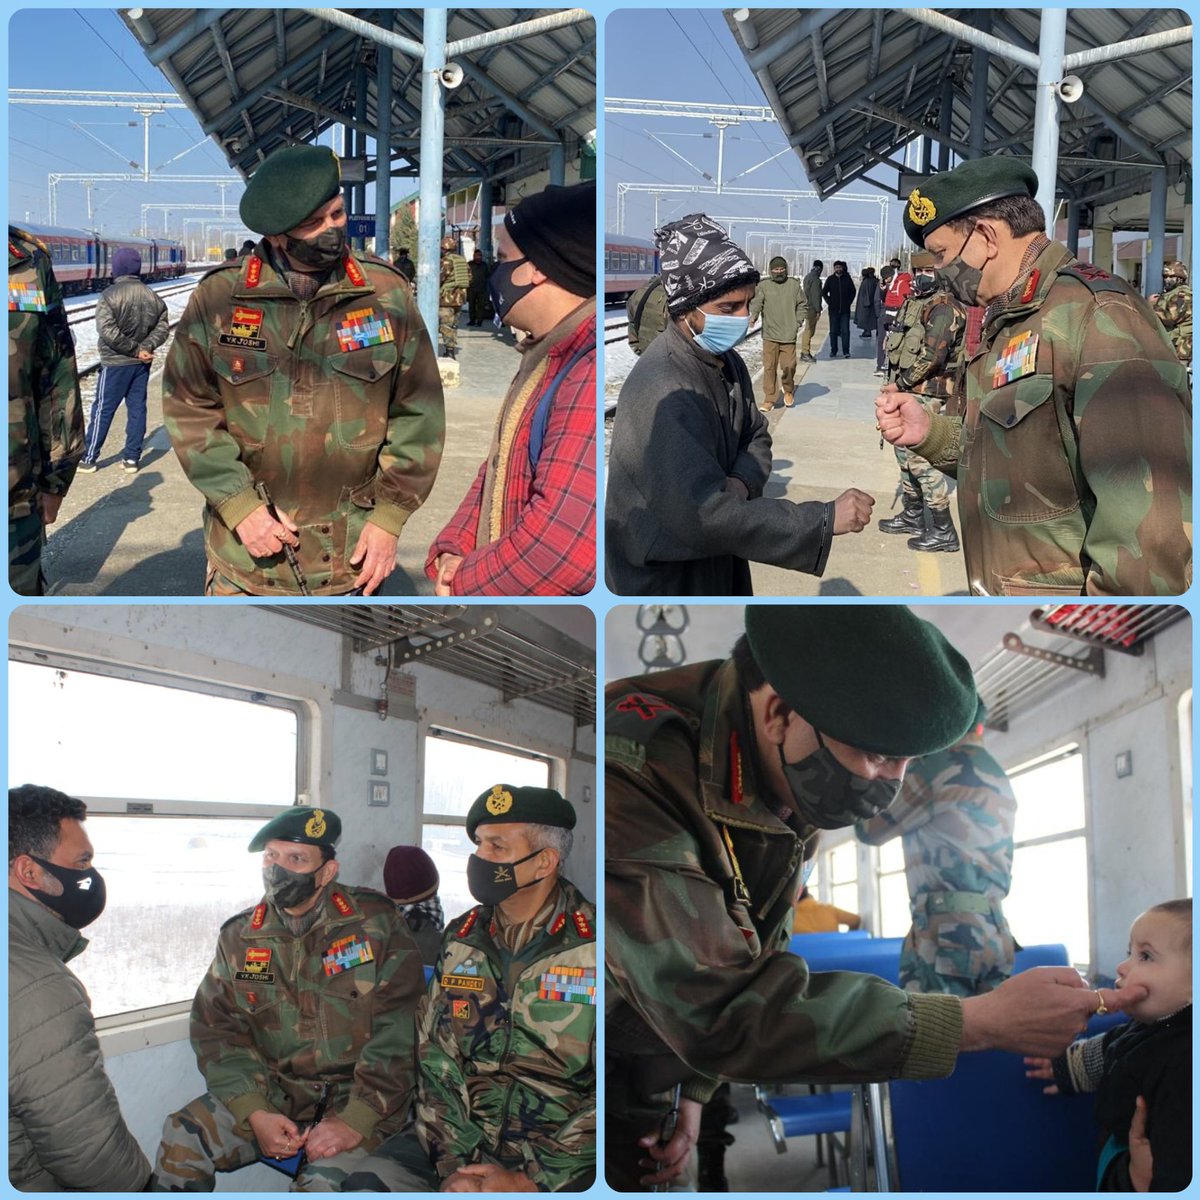 #LtGenYKJoshi, #ArmyCdrNC travelled by train in the #Anantnag #Kulgam Sector. In his interaction with the #Awaam & Railway personnel, he assured them of the peaceful & secure environment in #Kashmir.

#WeCare
#ArmyDay2022 
#YuvameShakti 
@SriramKannan77
@HarbirSinghSuri @jkd18